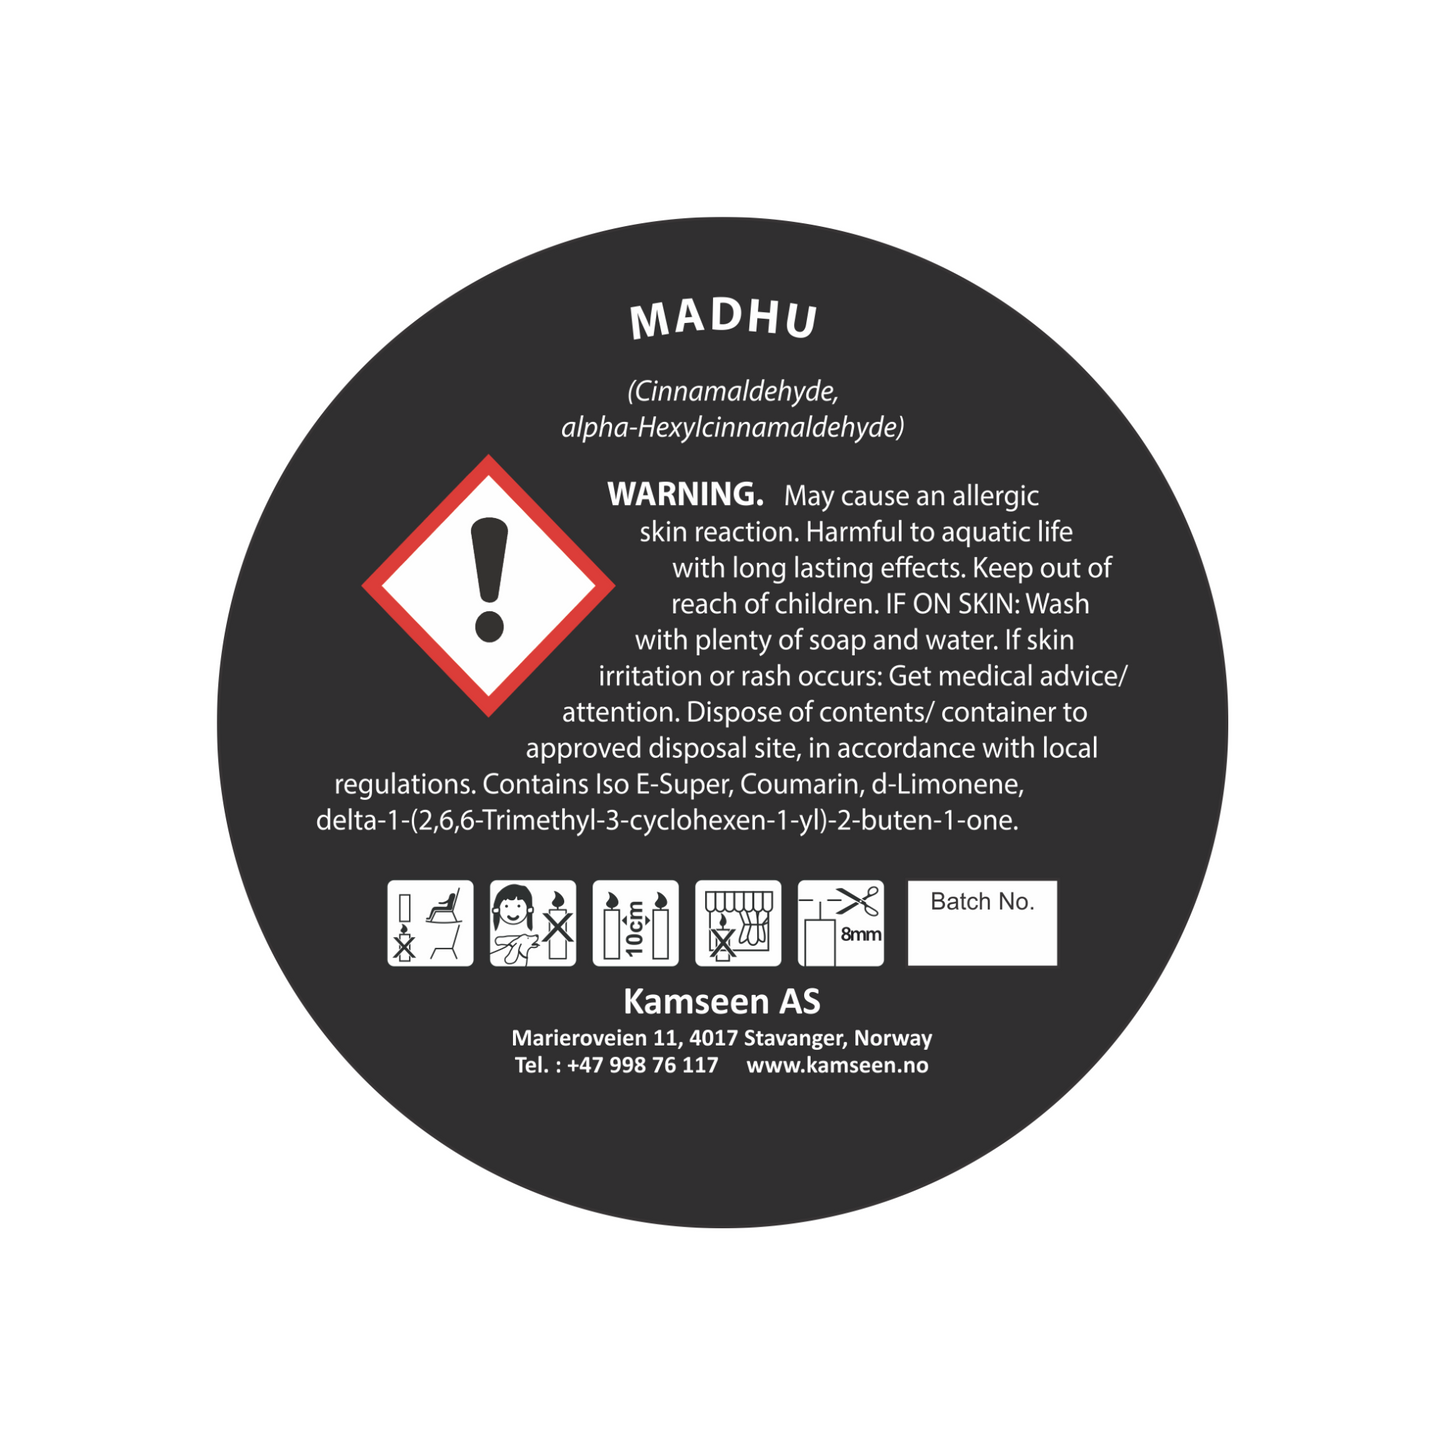 SCENTED CANDLE MADHU- Dark hen and Tobacco